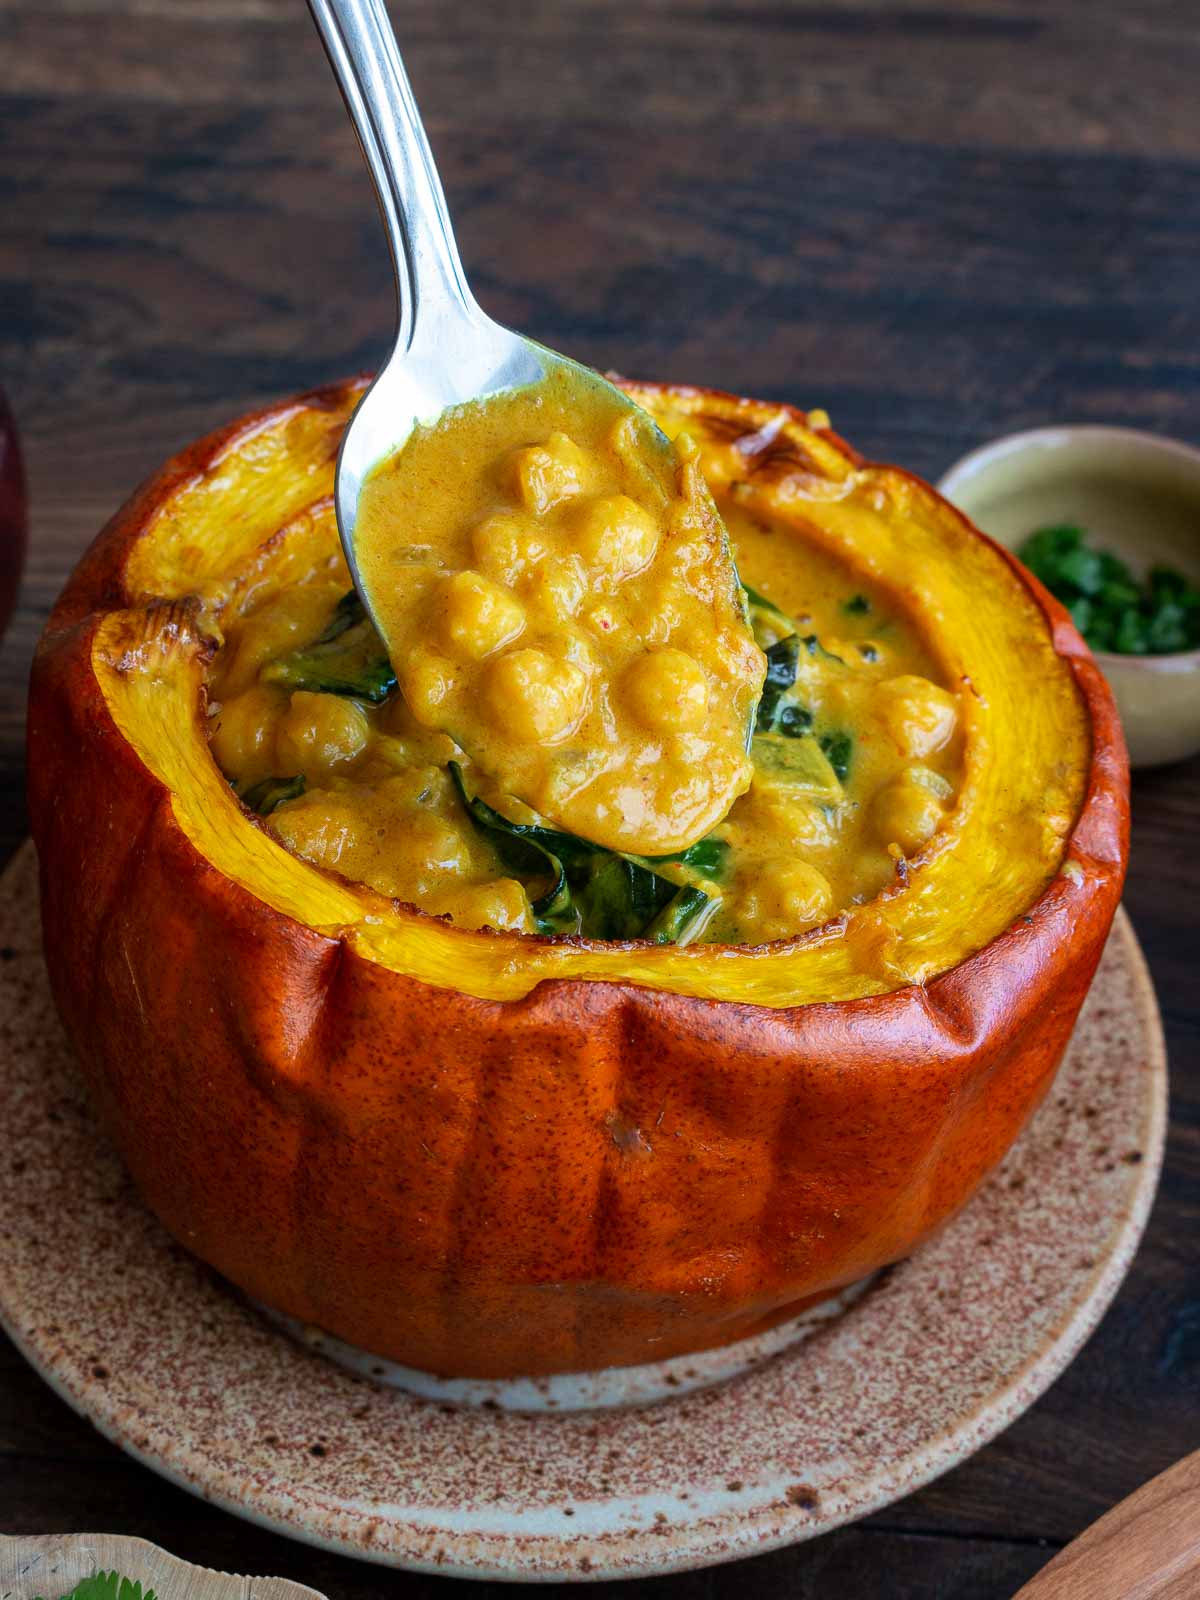 The bite shot of delicious coconut chickpea curry in a spoon inside the edible pumpkin bowl.